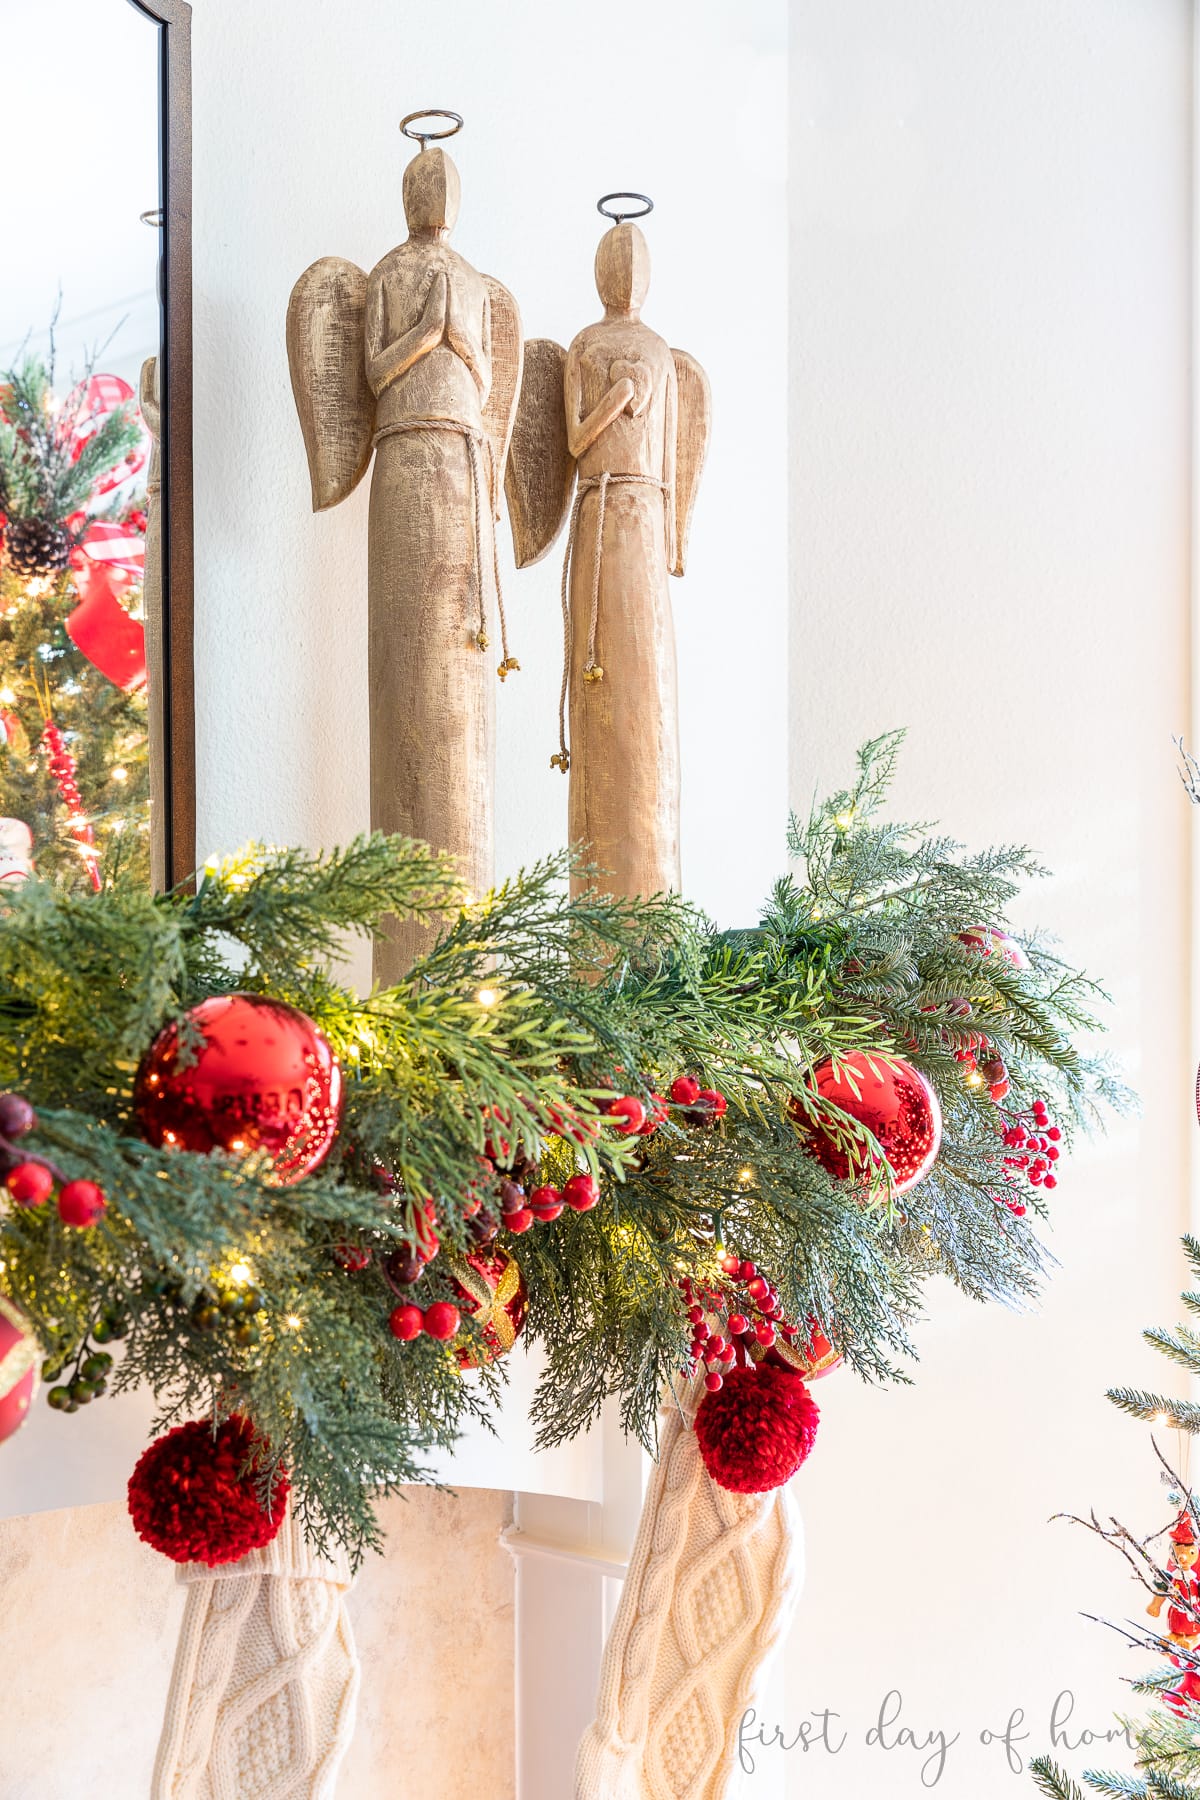 Two tall wooden angel statues sitting on a Christmas mantel 